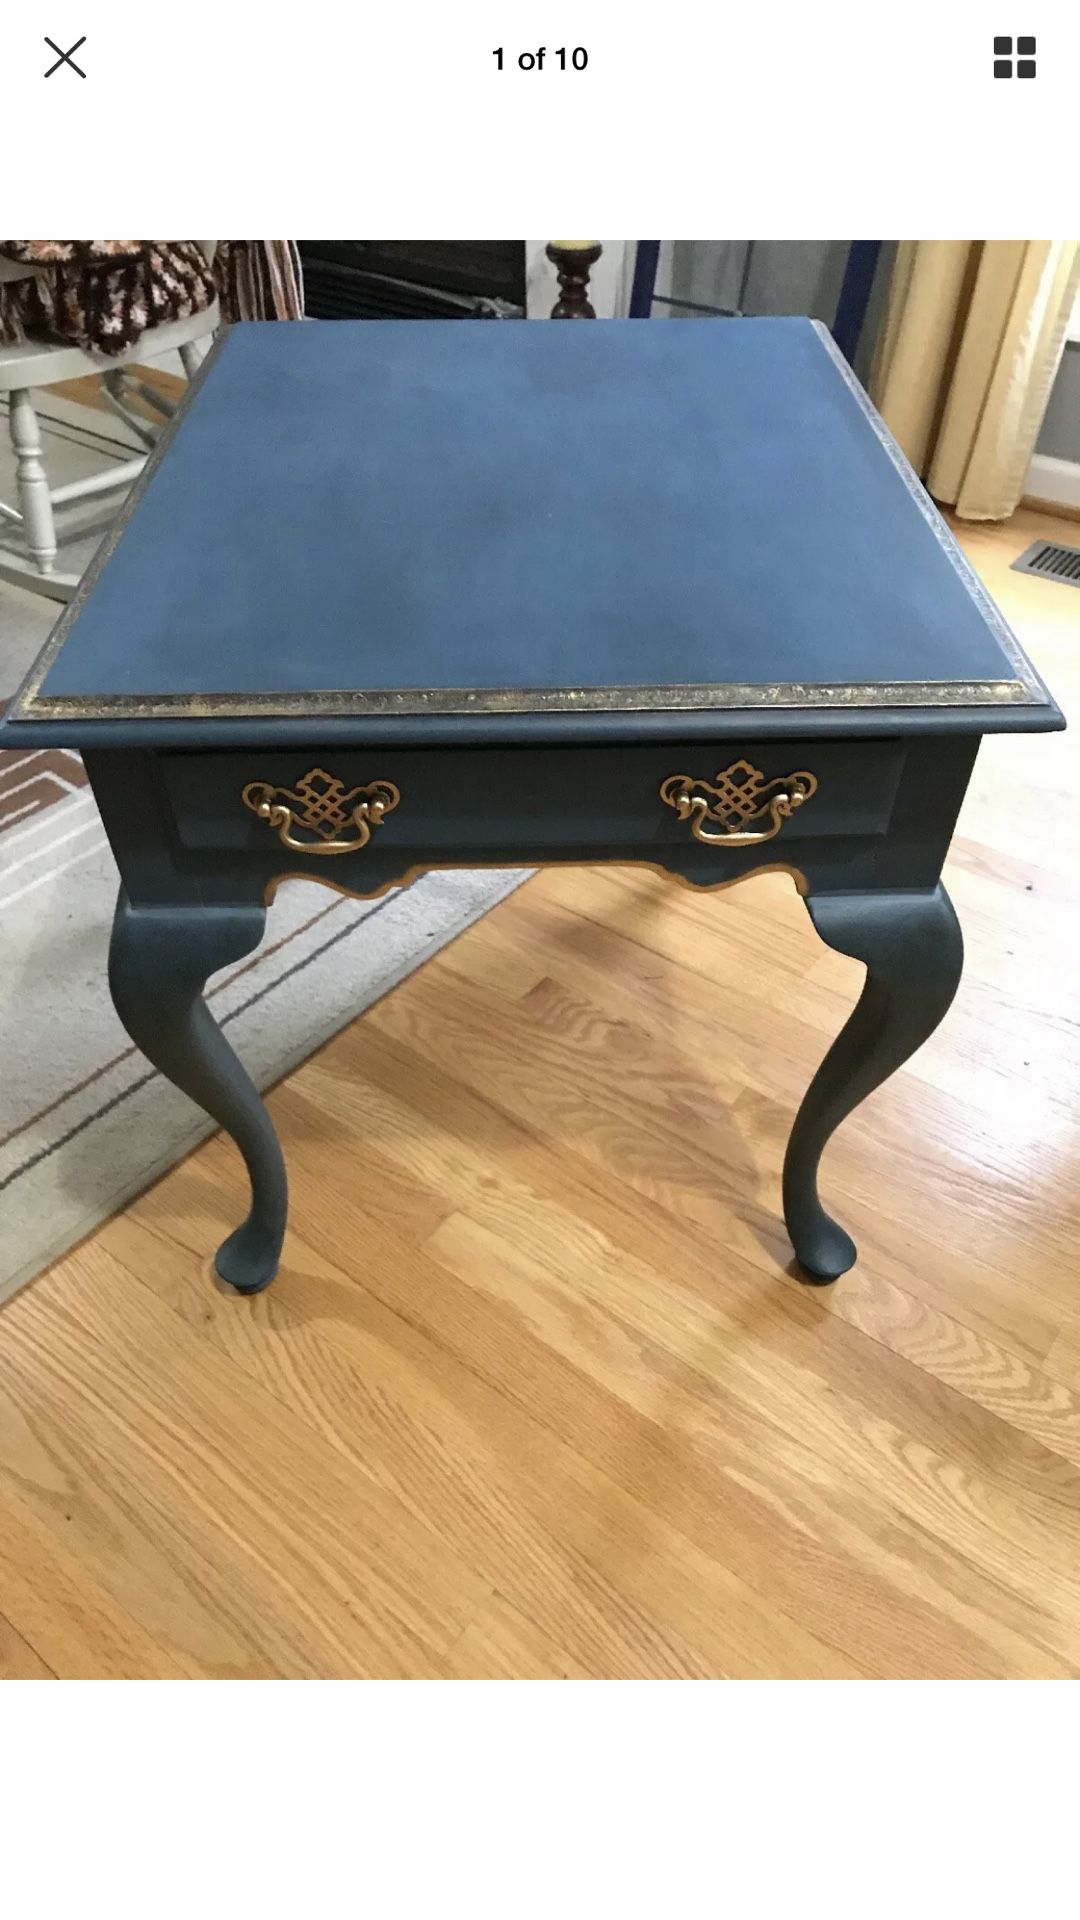 French Provencial side table with storage